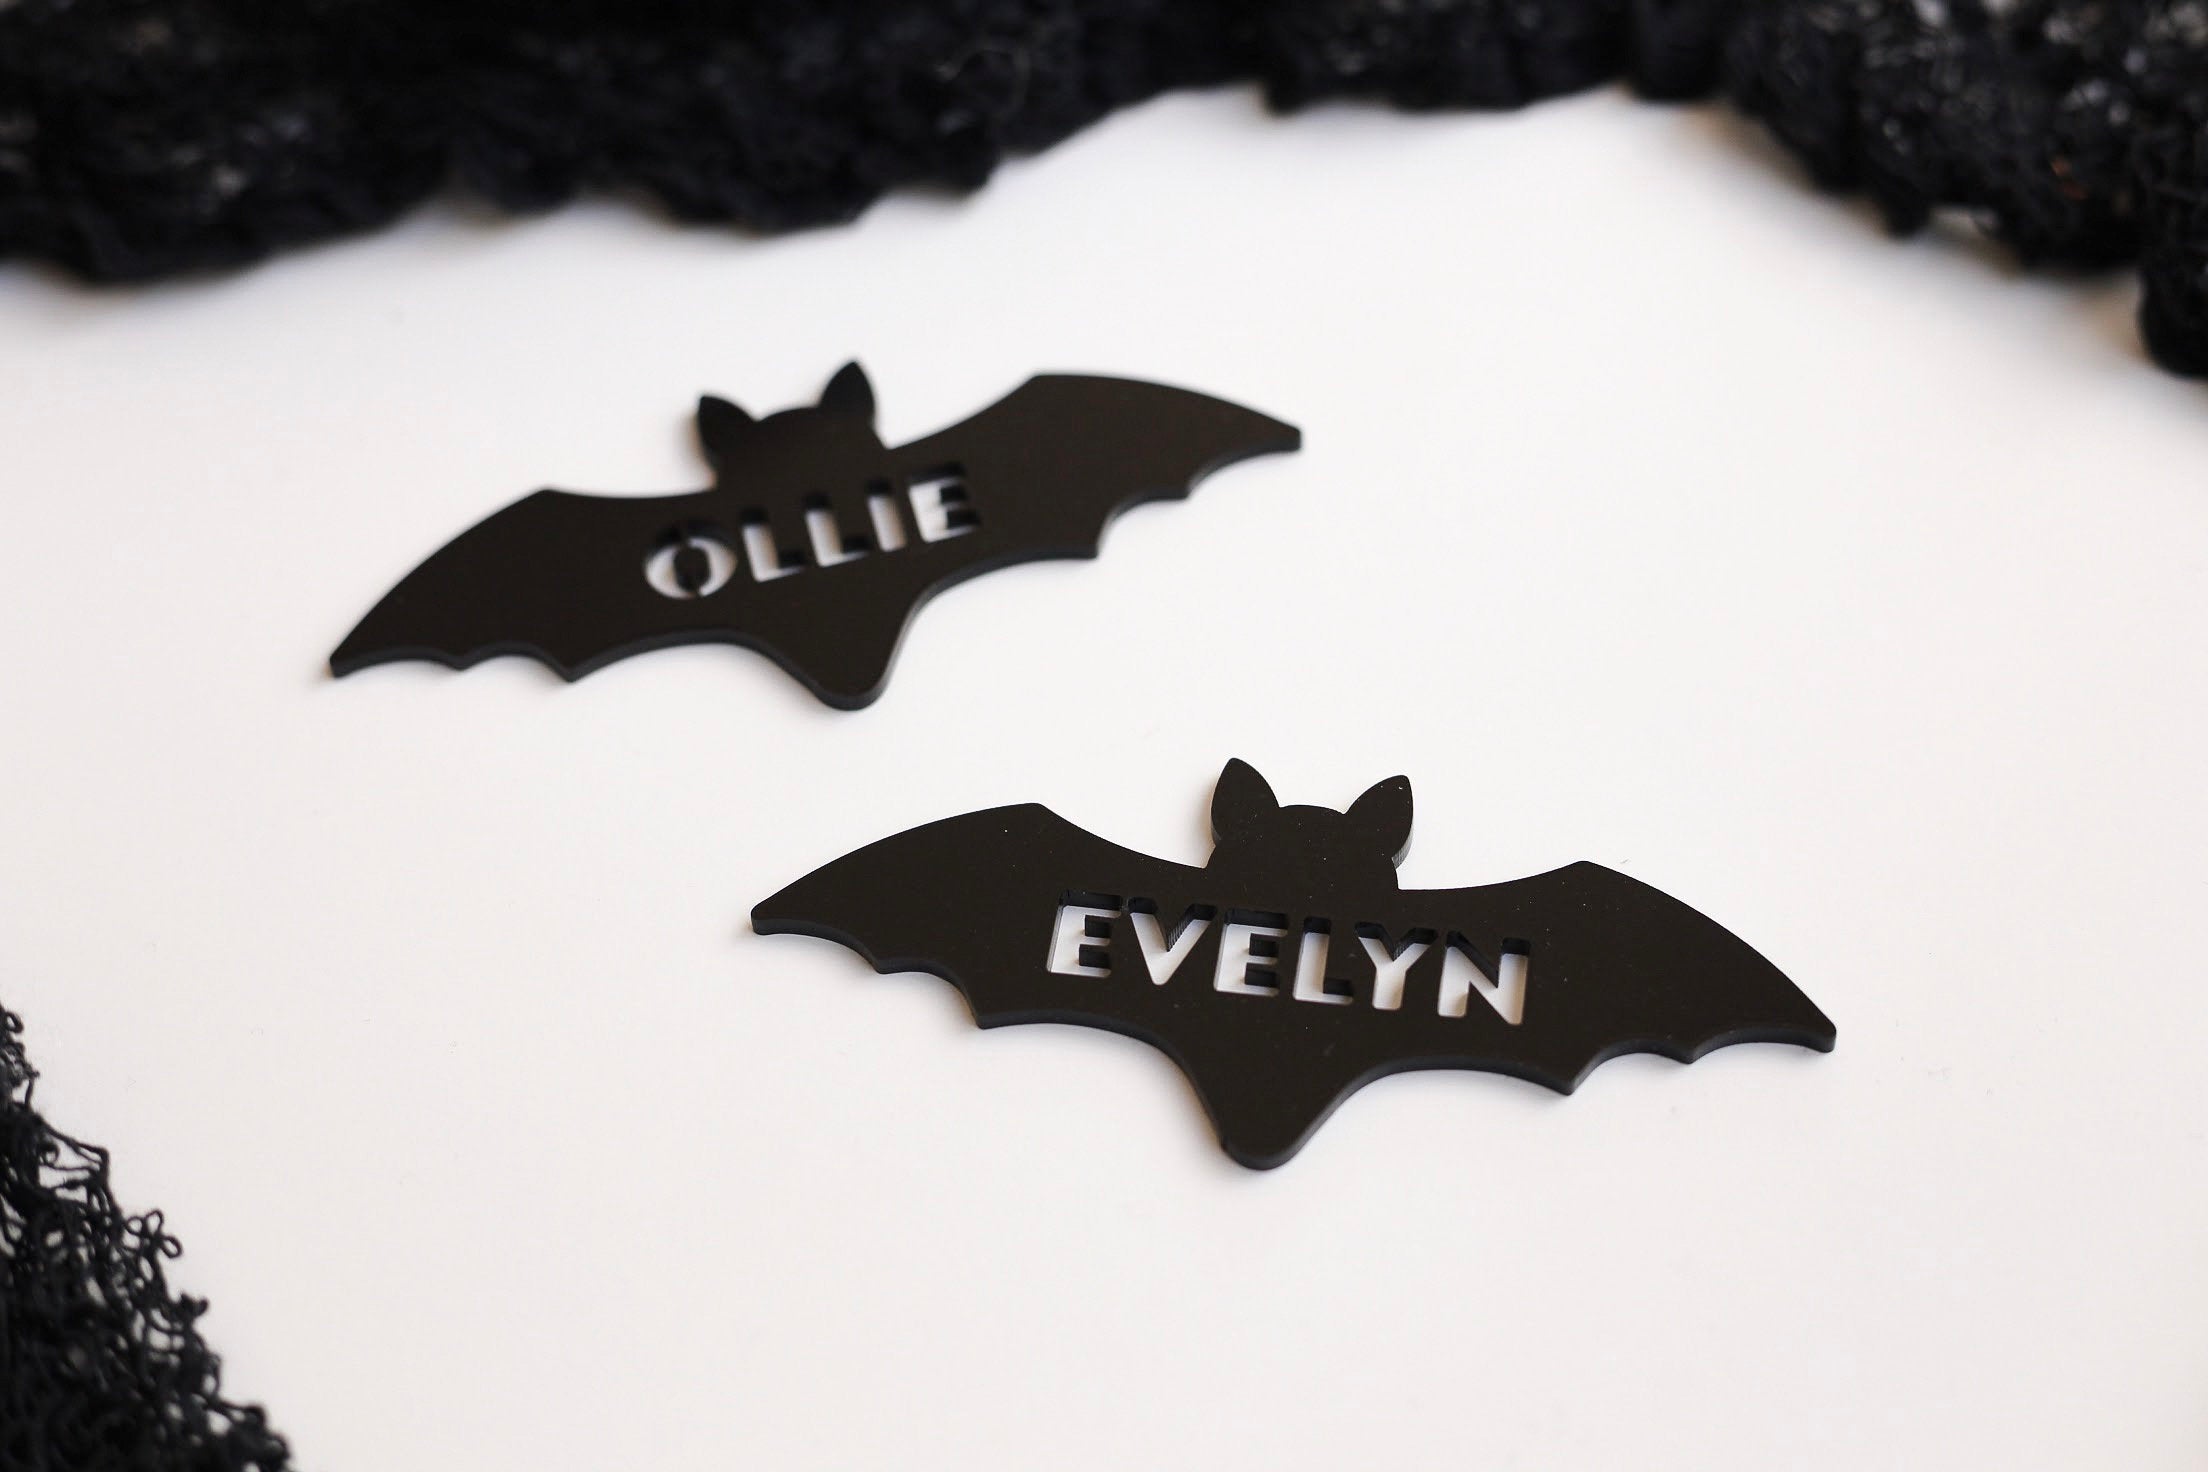 Name Place Card Cutout - Halloween Party, Halloween Birthday, Table seat assignment, Laser cut wood acrylic